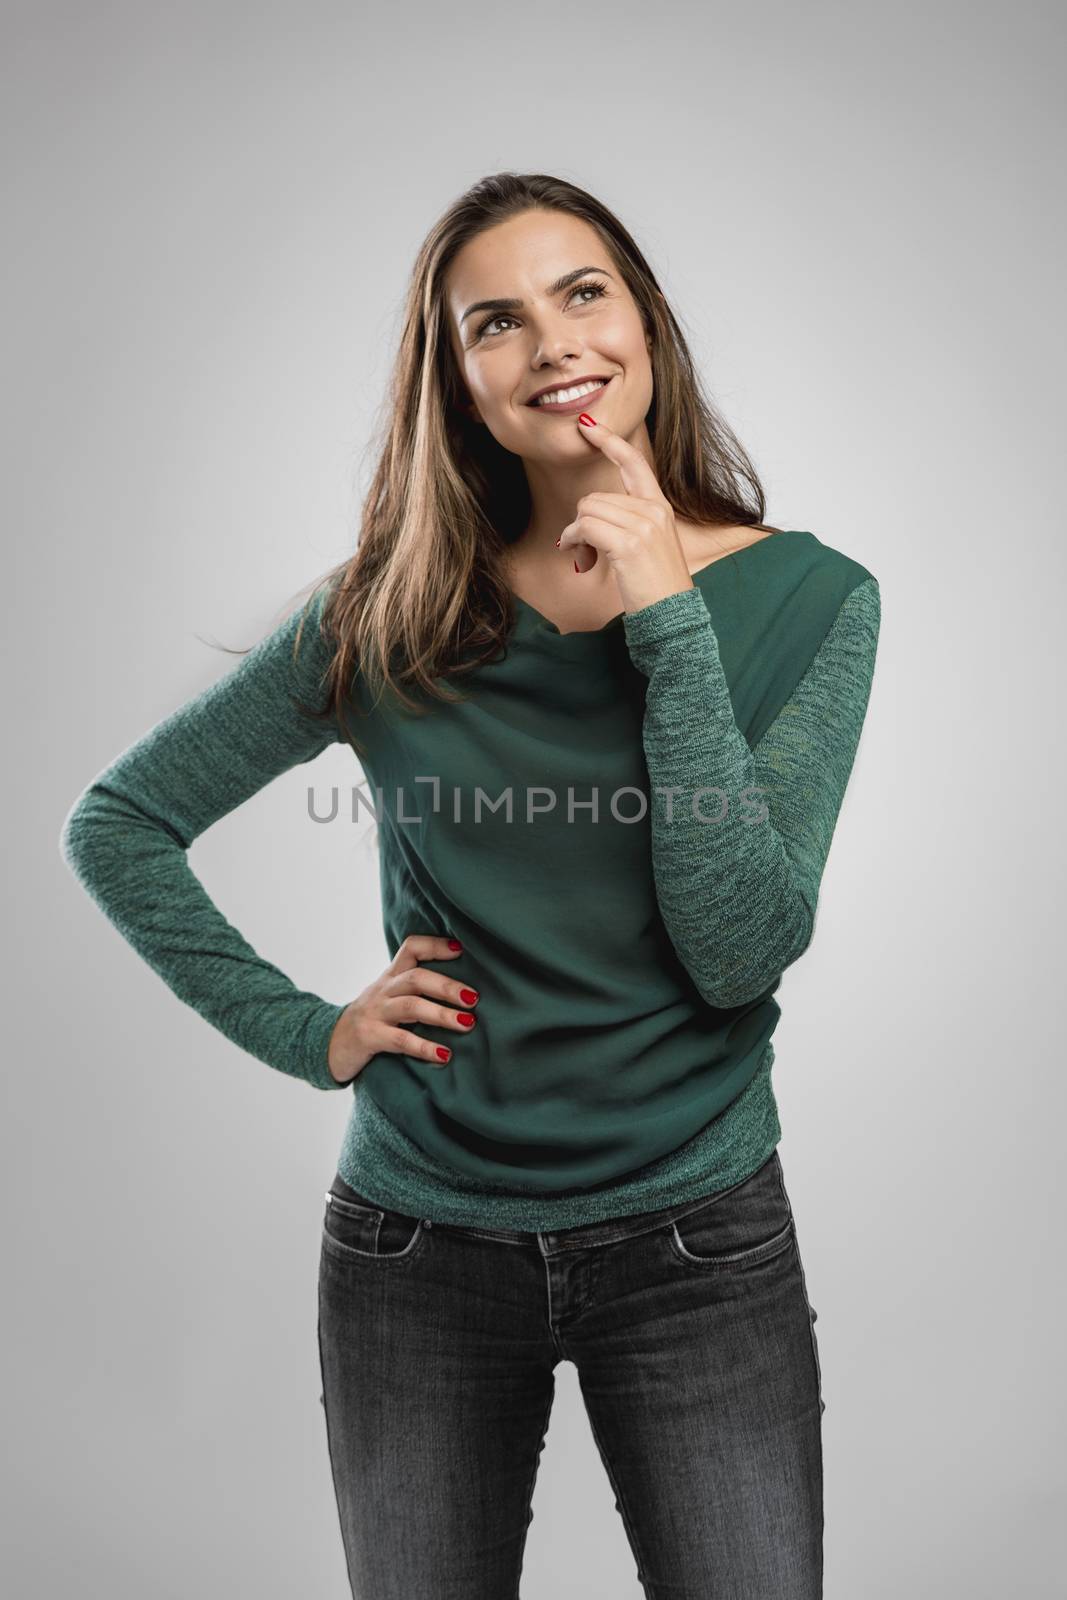 Beautiful woman smiling and with her hand on the chin thinking on something